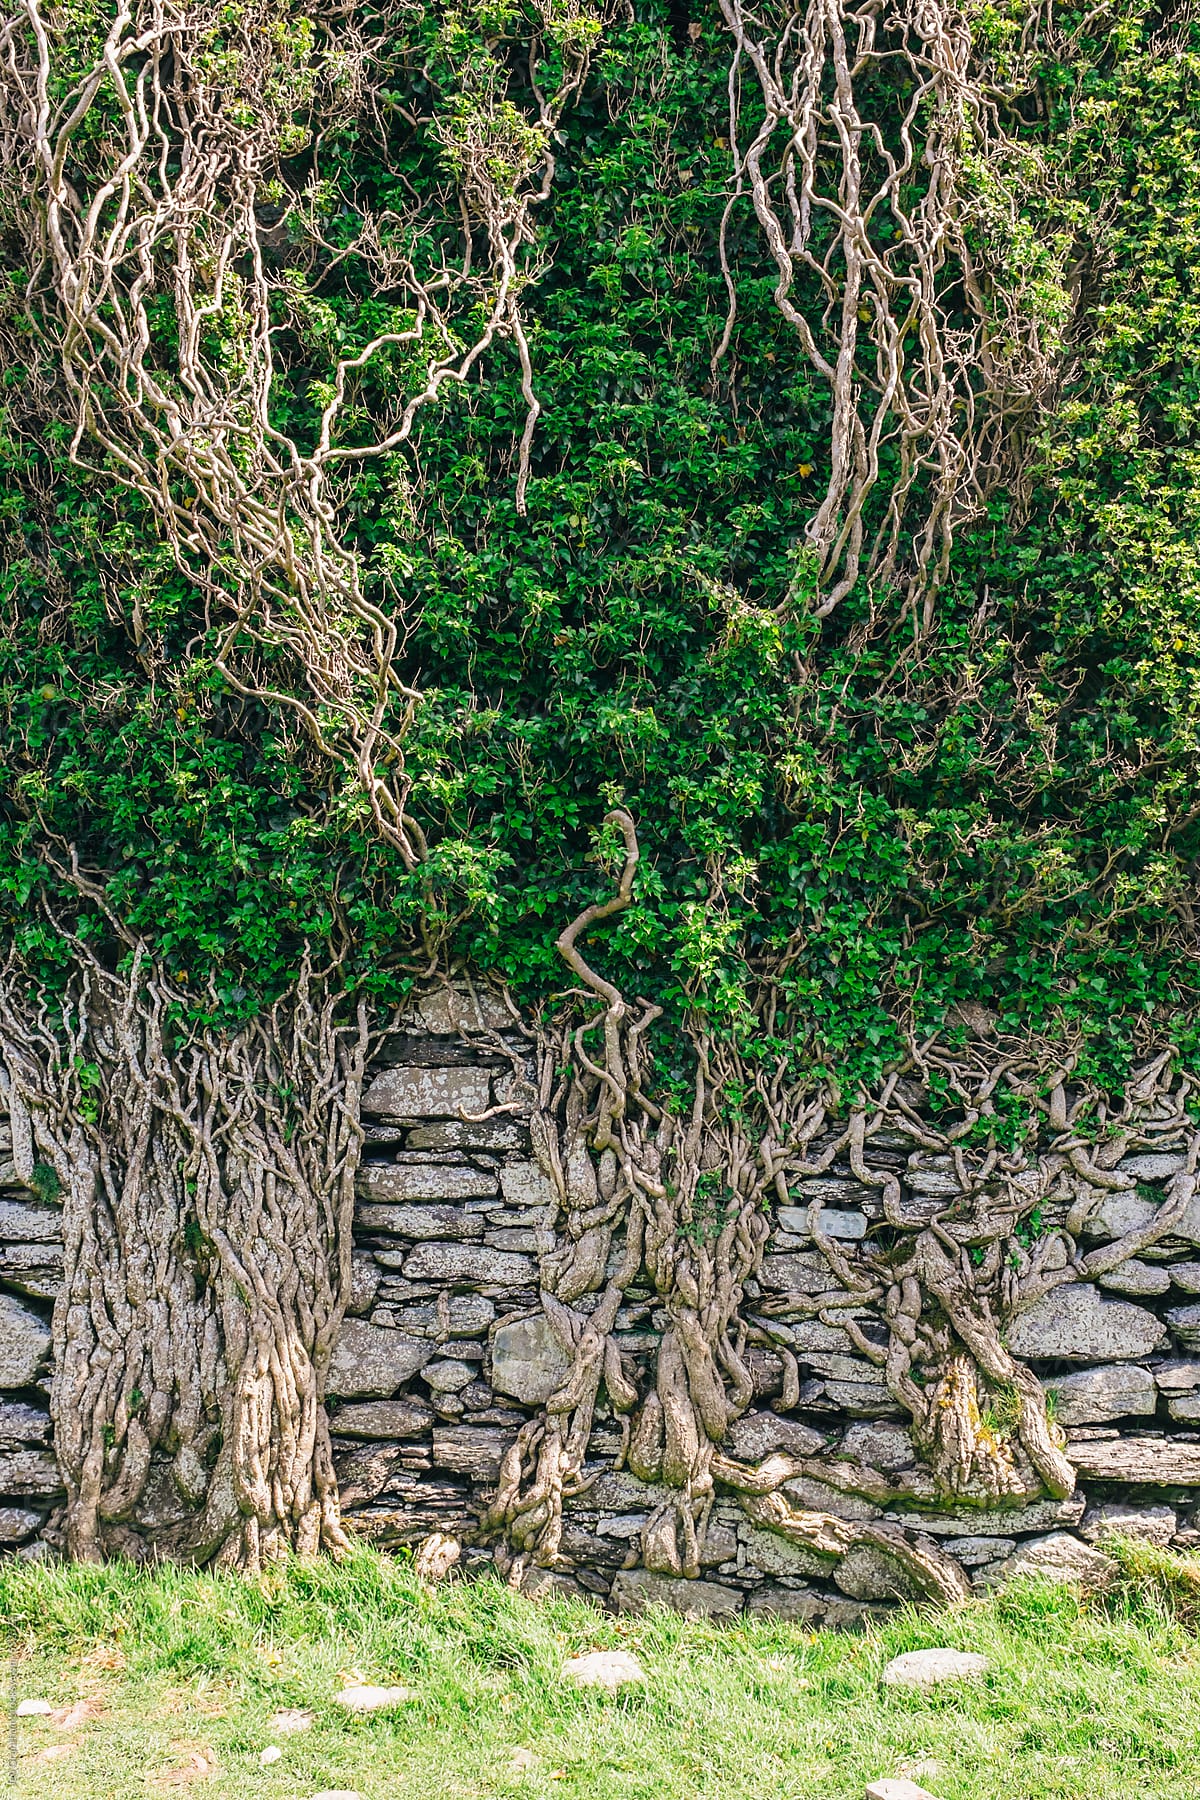 Vines growing on Ballycarbery Castle